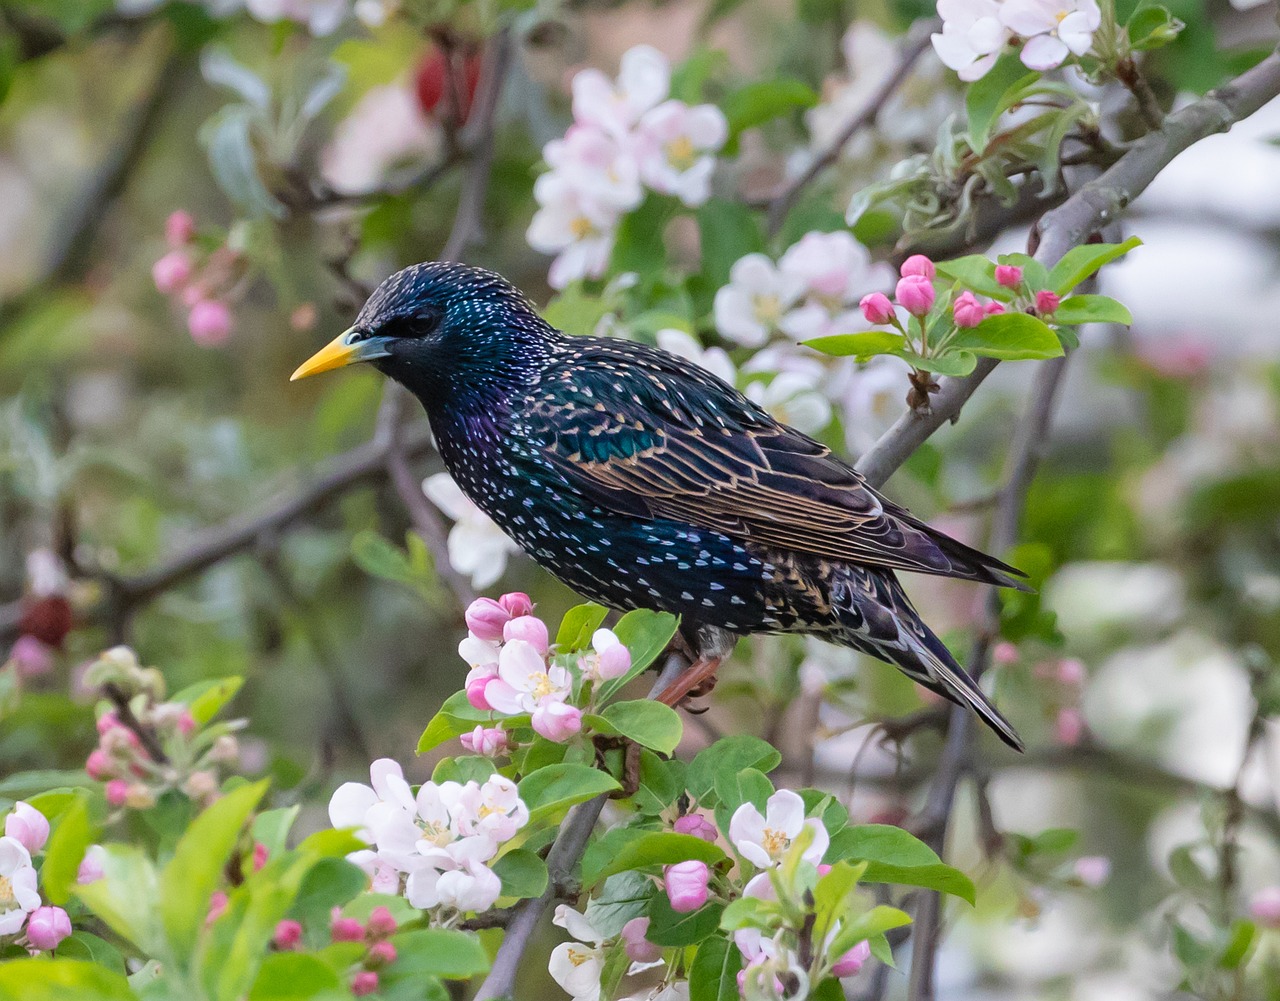 HOW TO GET RID OF STARLINGS IN BARN